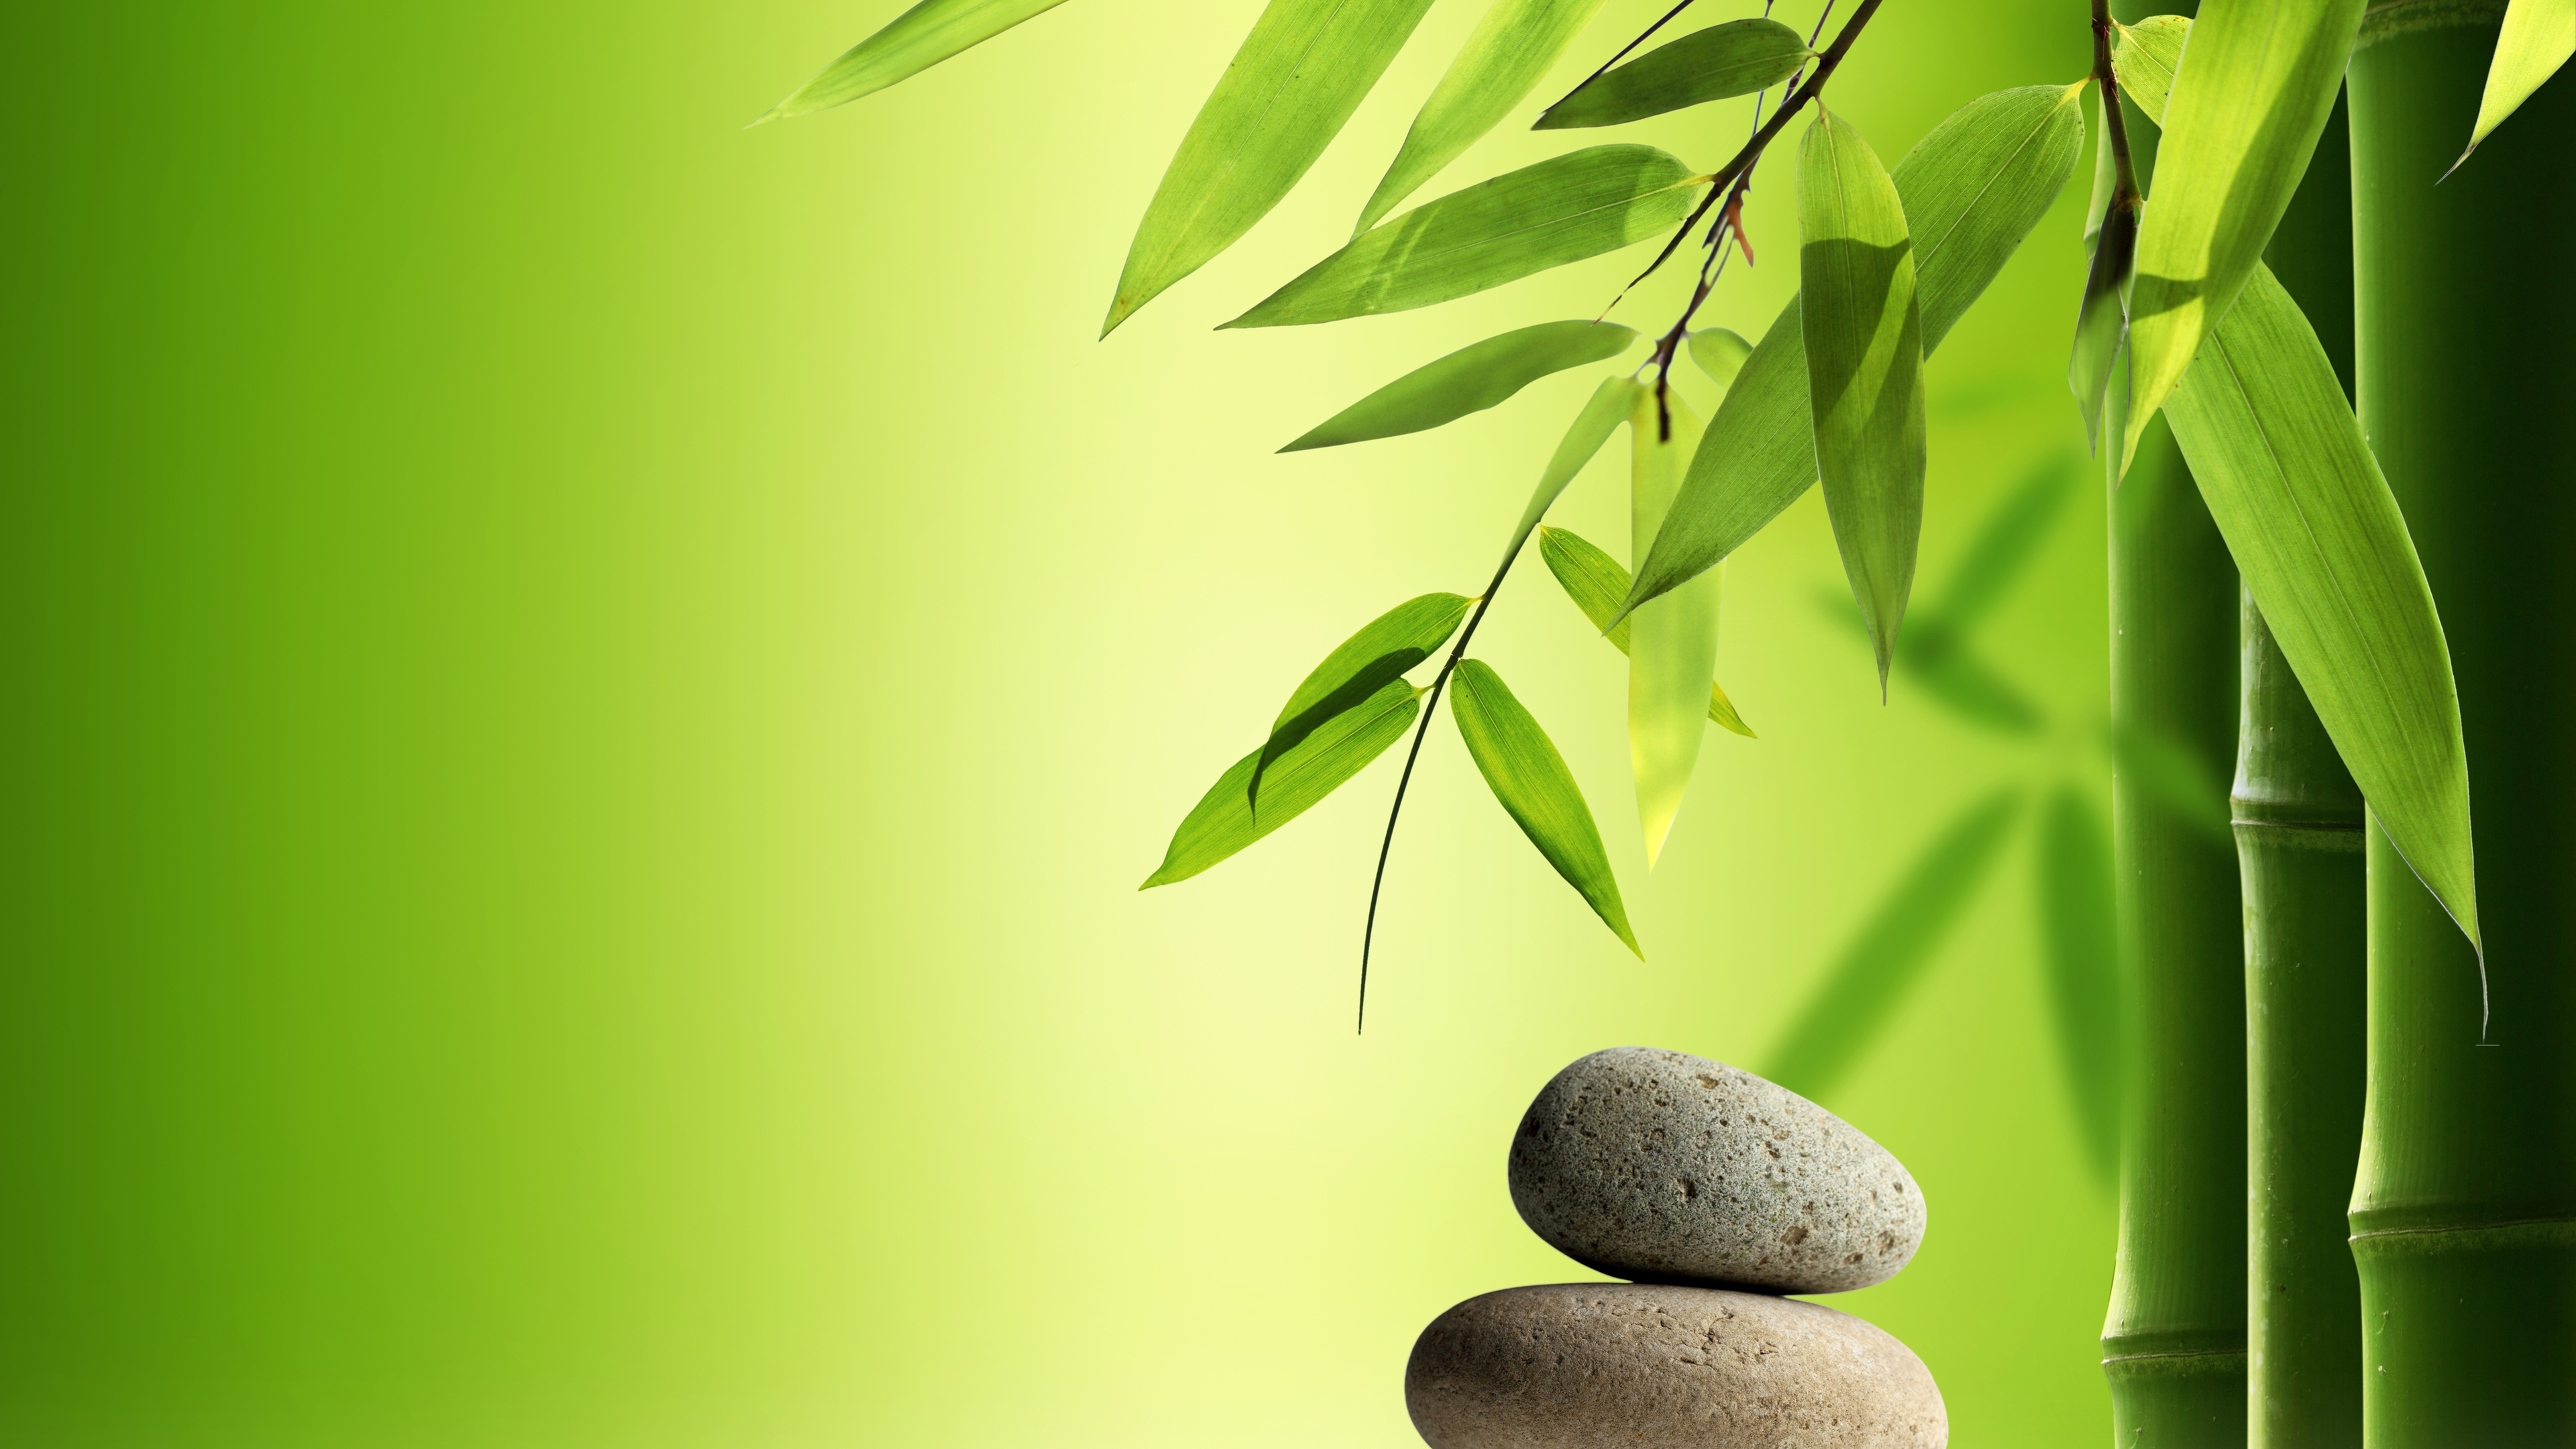 Bamboo: Plant which strength is generally similar to a strong softwood or hardwood timber. 3840x2160 4K Wallpaper.